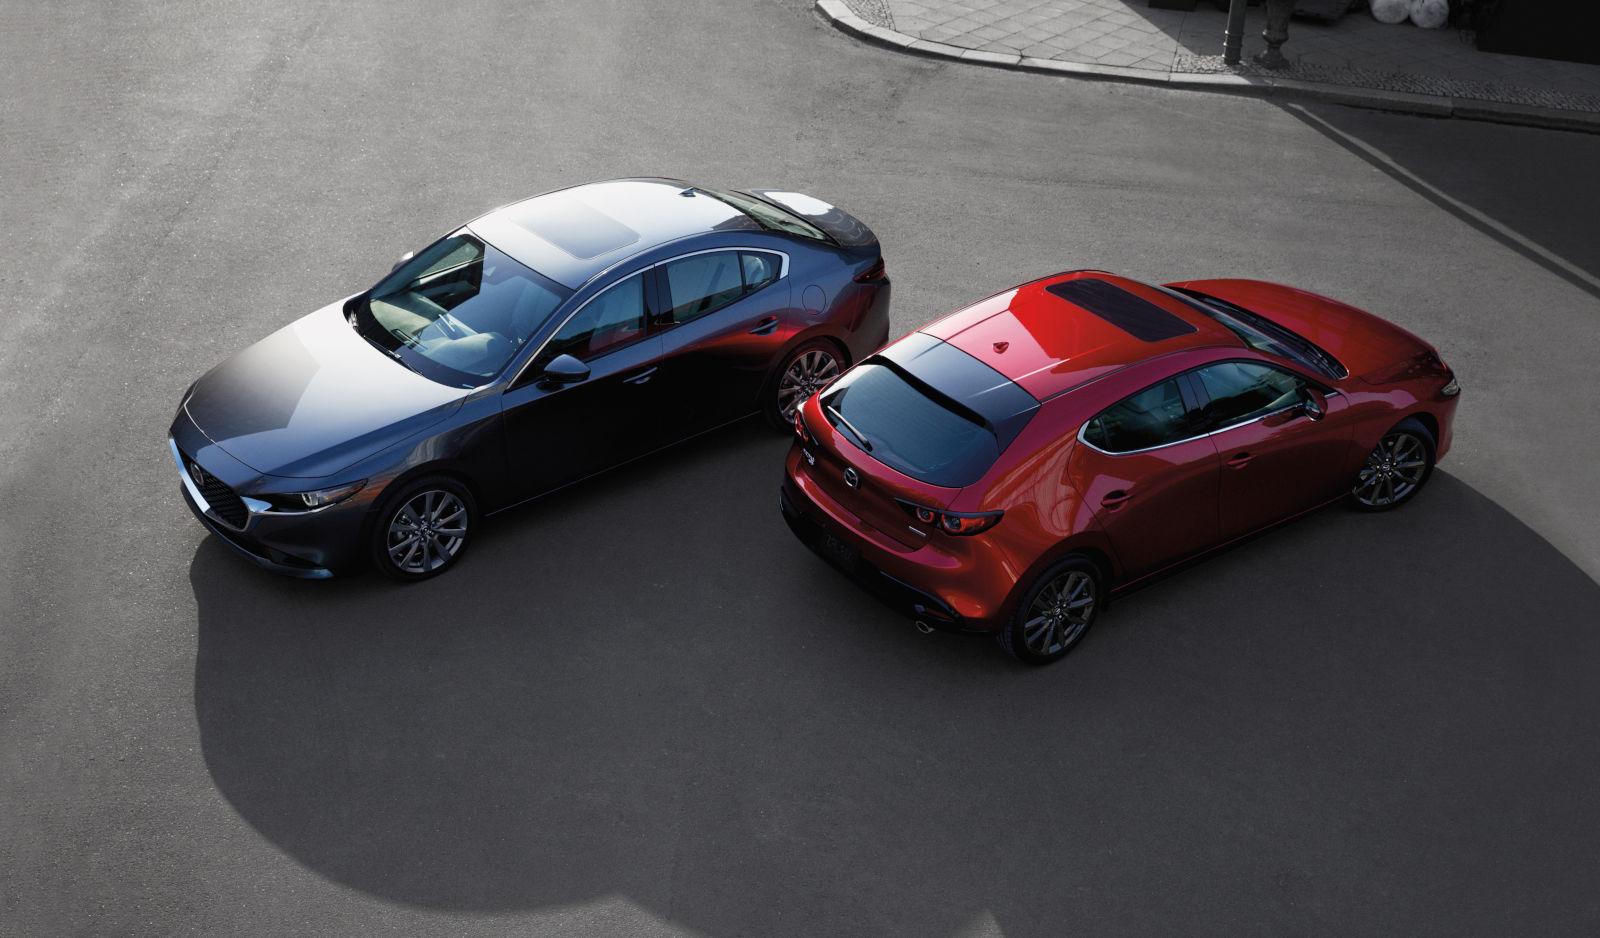 Three Mazda vehicles were named the Best Choice by Protégez-Vous magazine in 2023